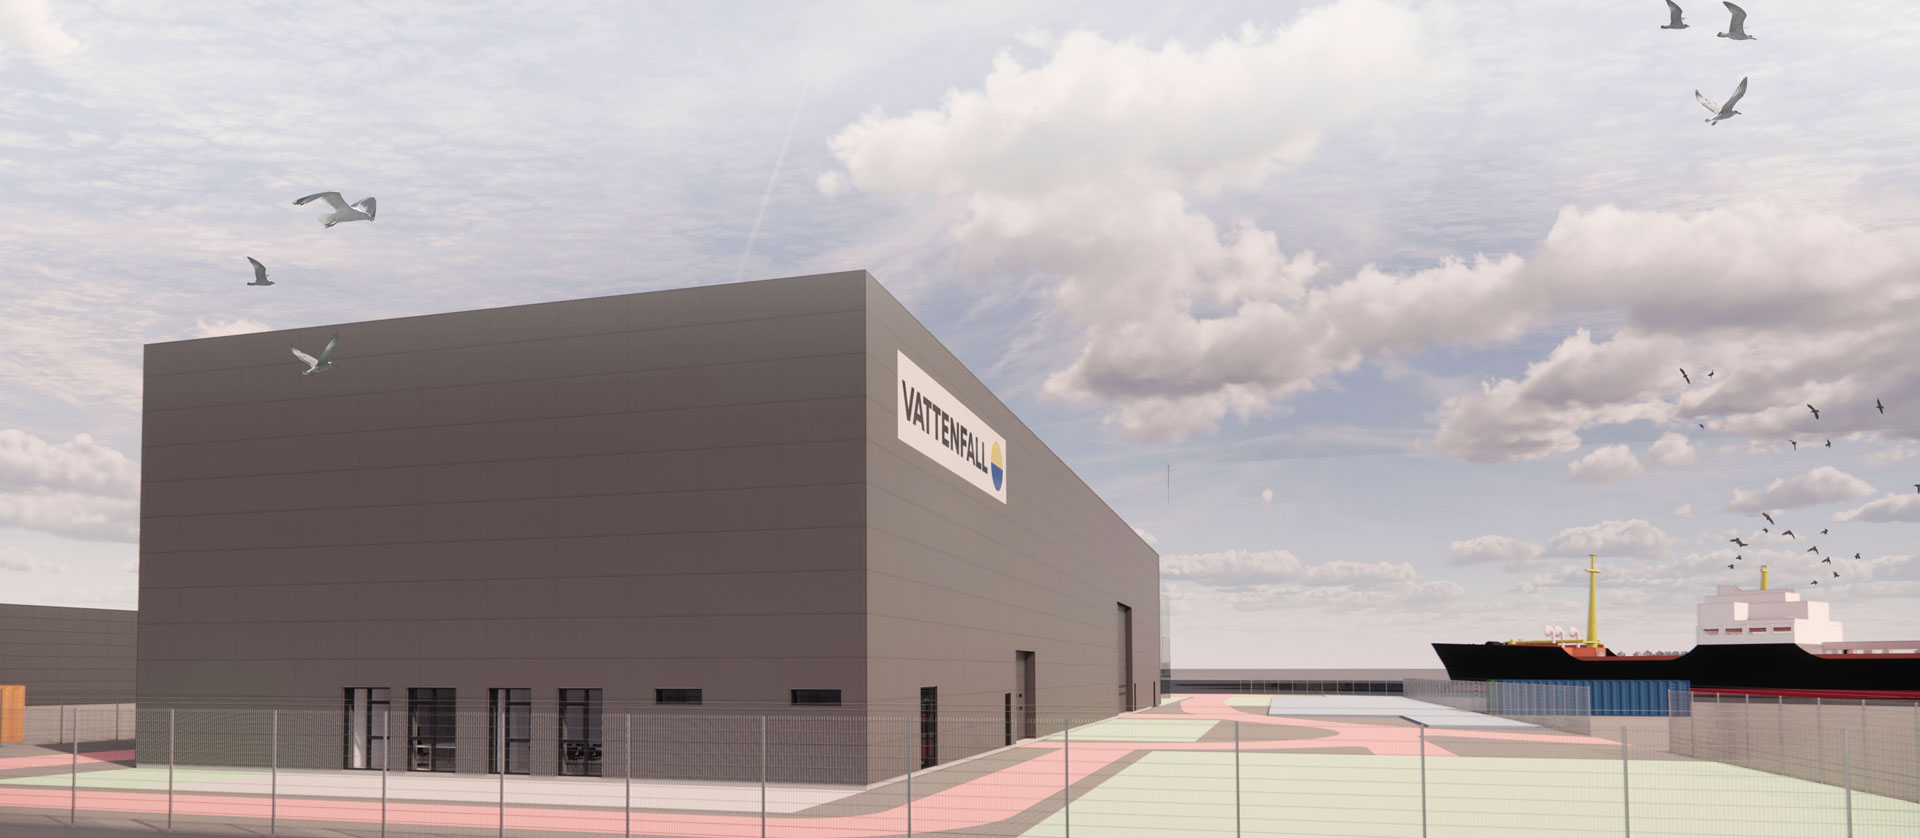 Warehouse for wind turbines at the Danish Port of Esbjerg